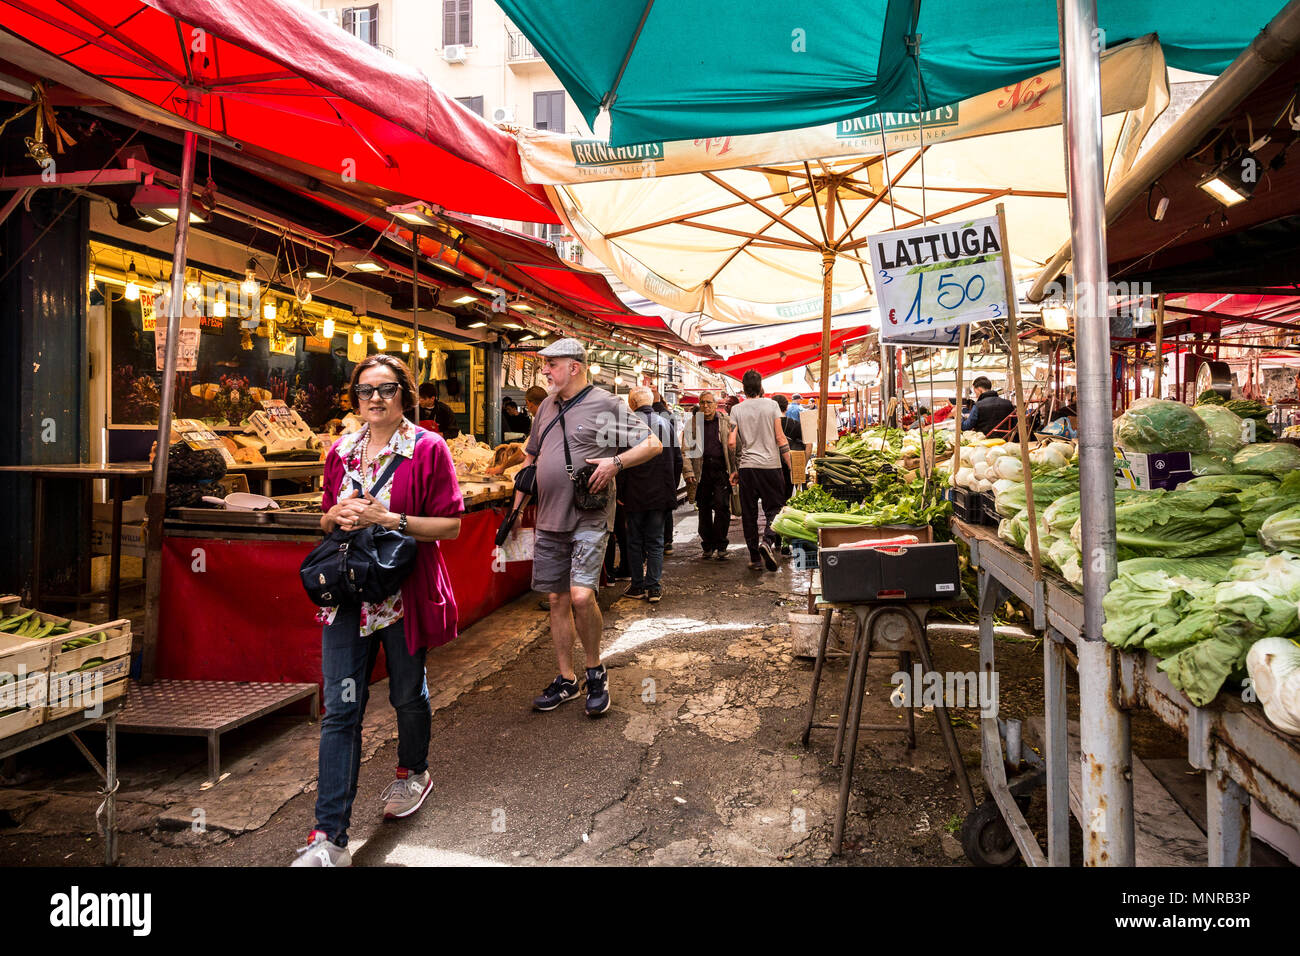 Palermo, Italy, April 26, 2018: Balaro market with fresh fruit, vegetable and fish in Palermo. Stock Photo